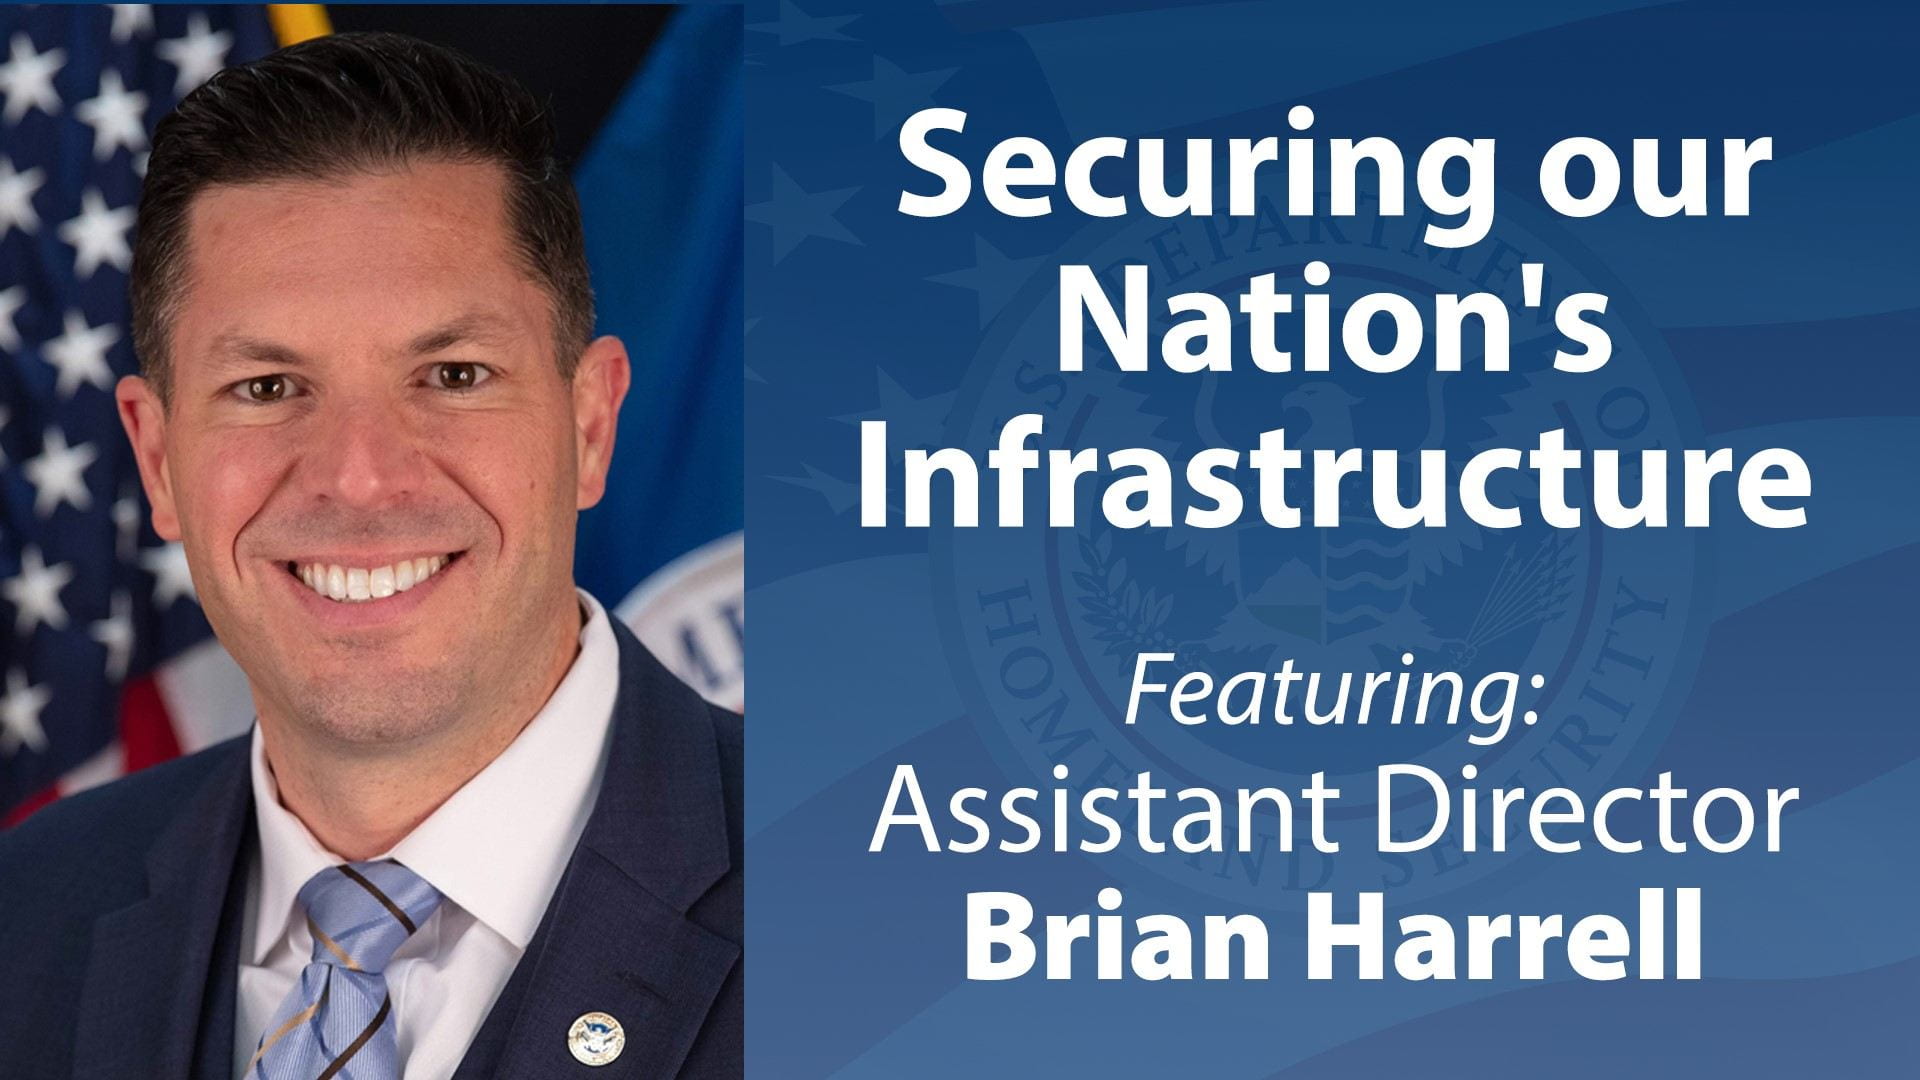 McCrary Institute hosts DHS CISA Assistant Director Brian Harrell on campus August 23